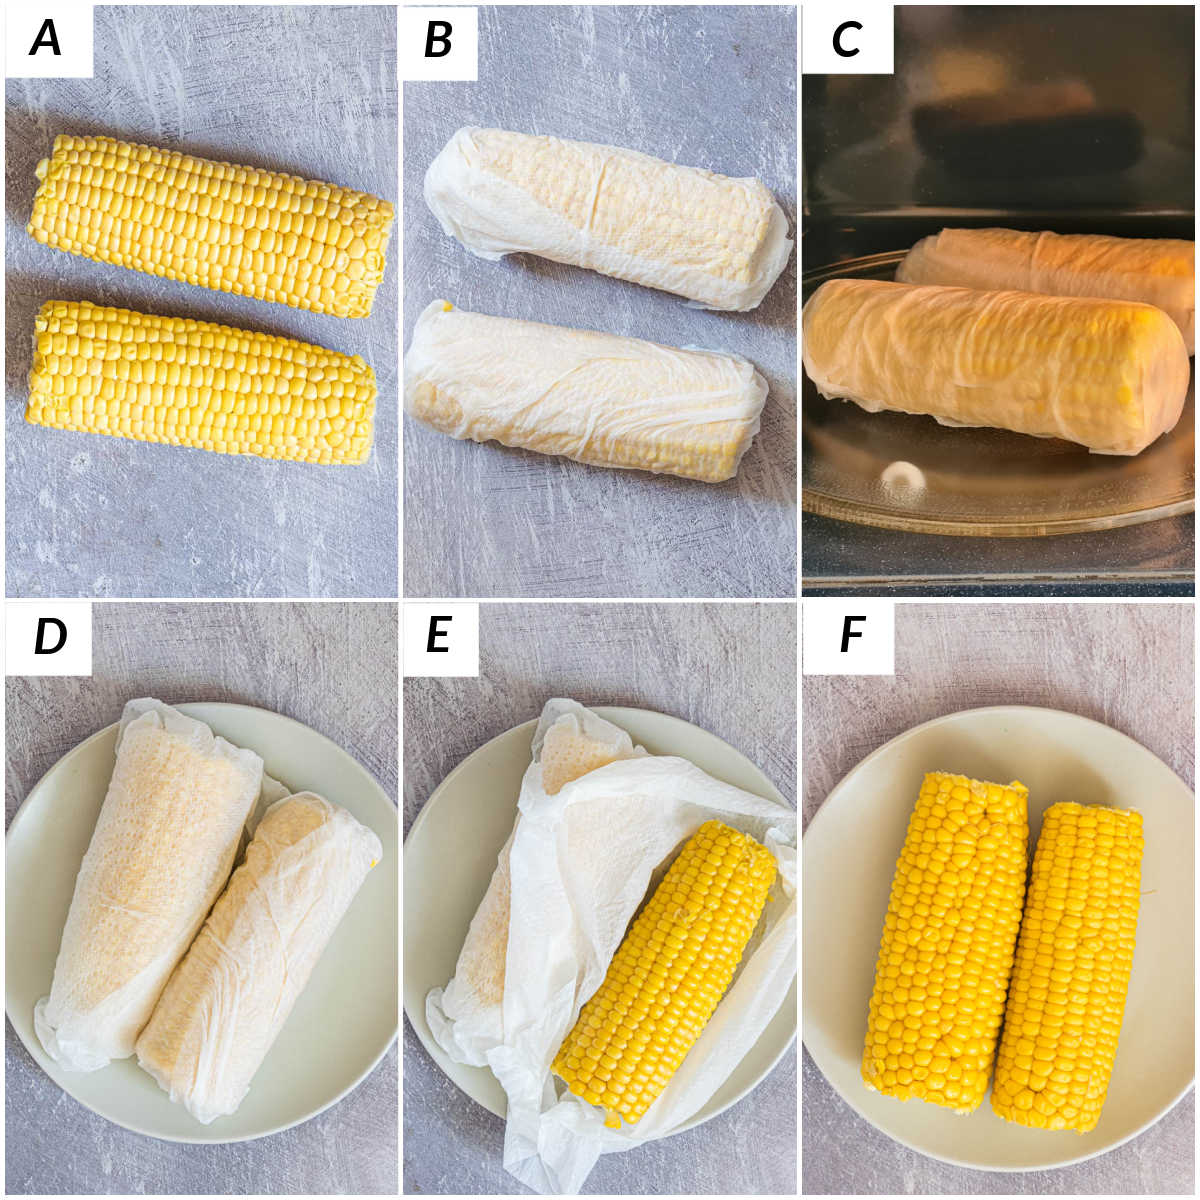 image collage showing the steps for how to microwave corn on the cob